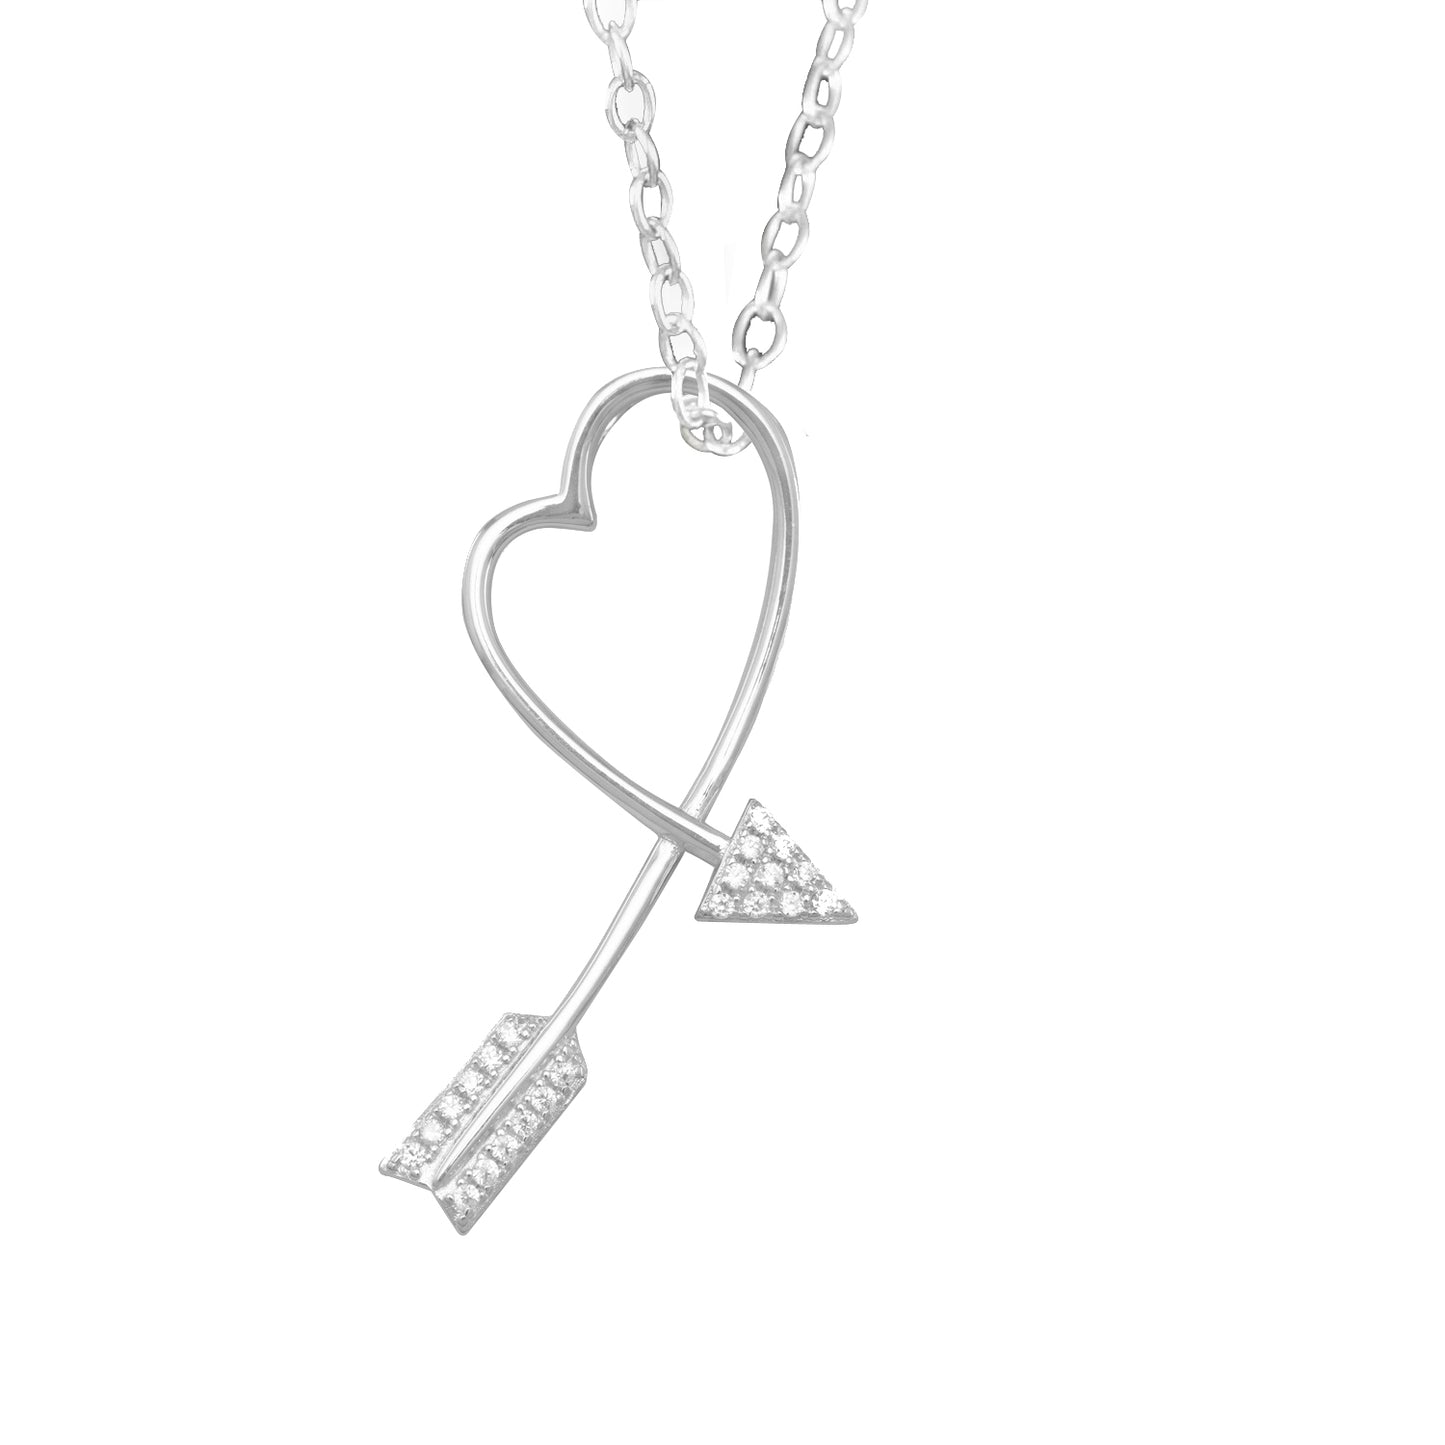 Precious Stars Jewelry Sterling Silver Cubic Zirconia Arrow Heart Slide Pendant with 16-inch Cable Chain